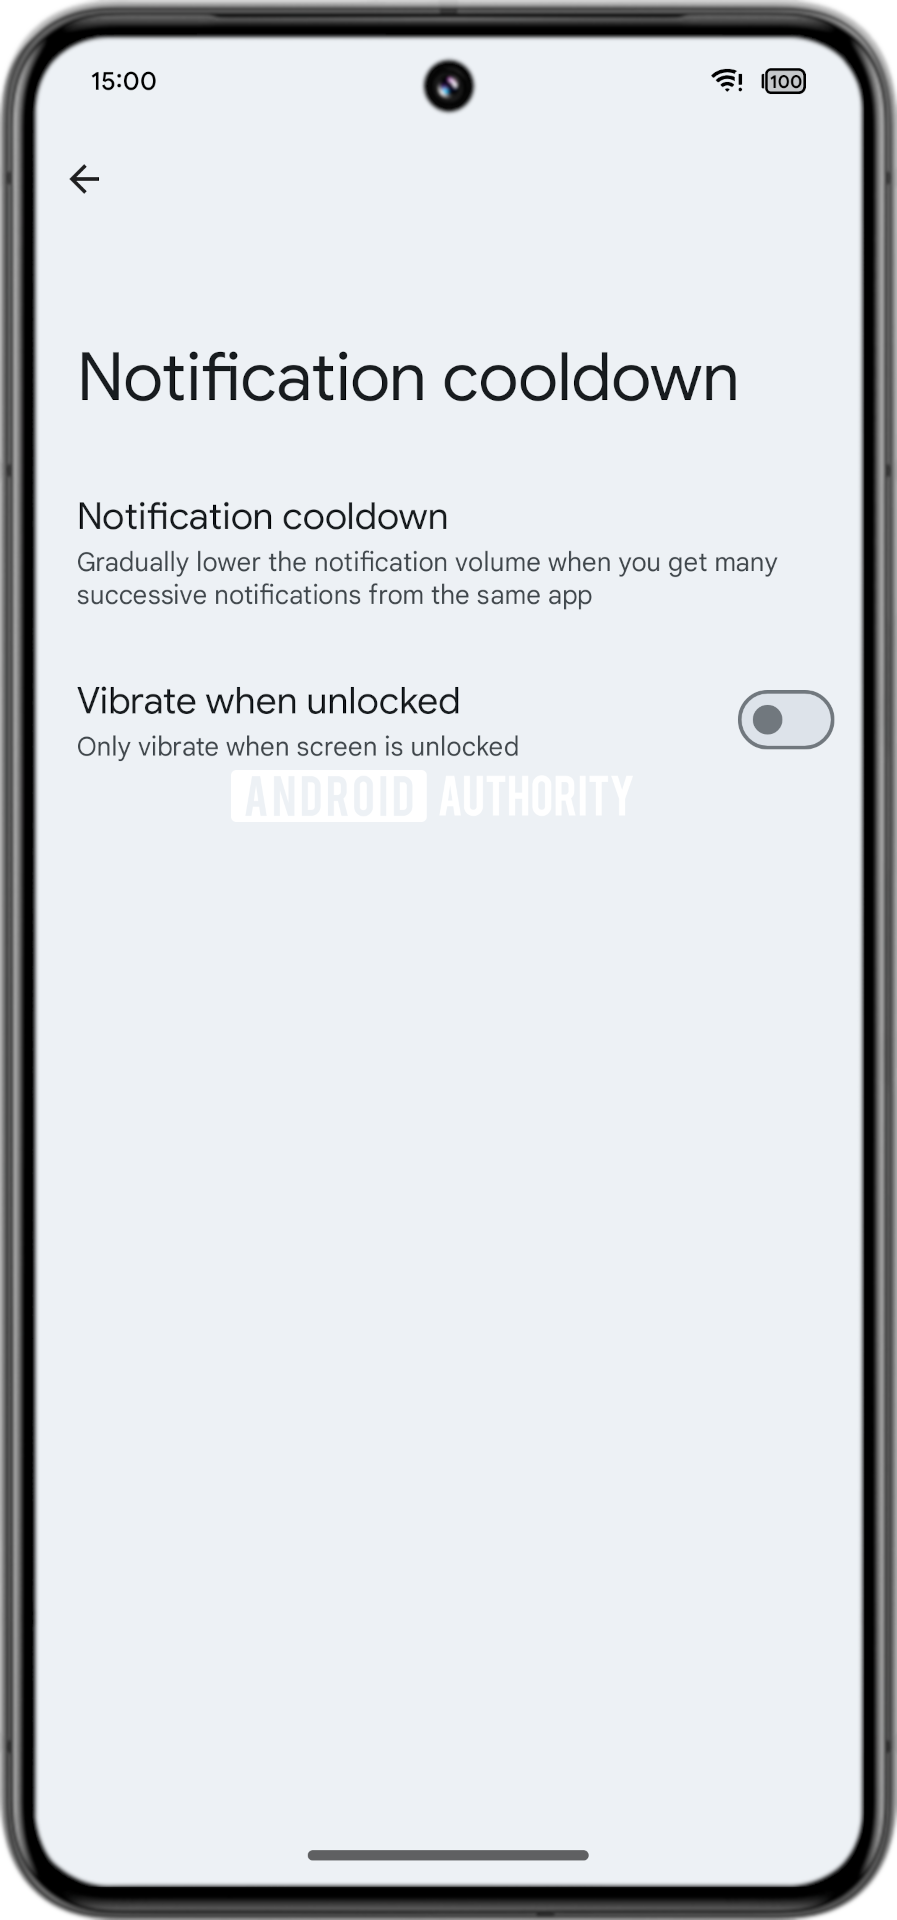 Notification cooldown settings with vibrate option